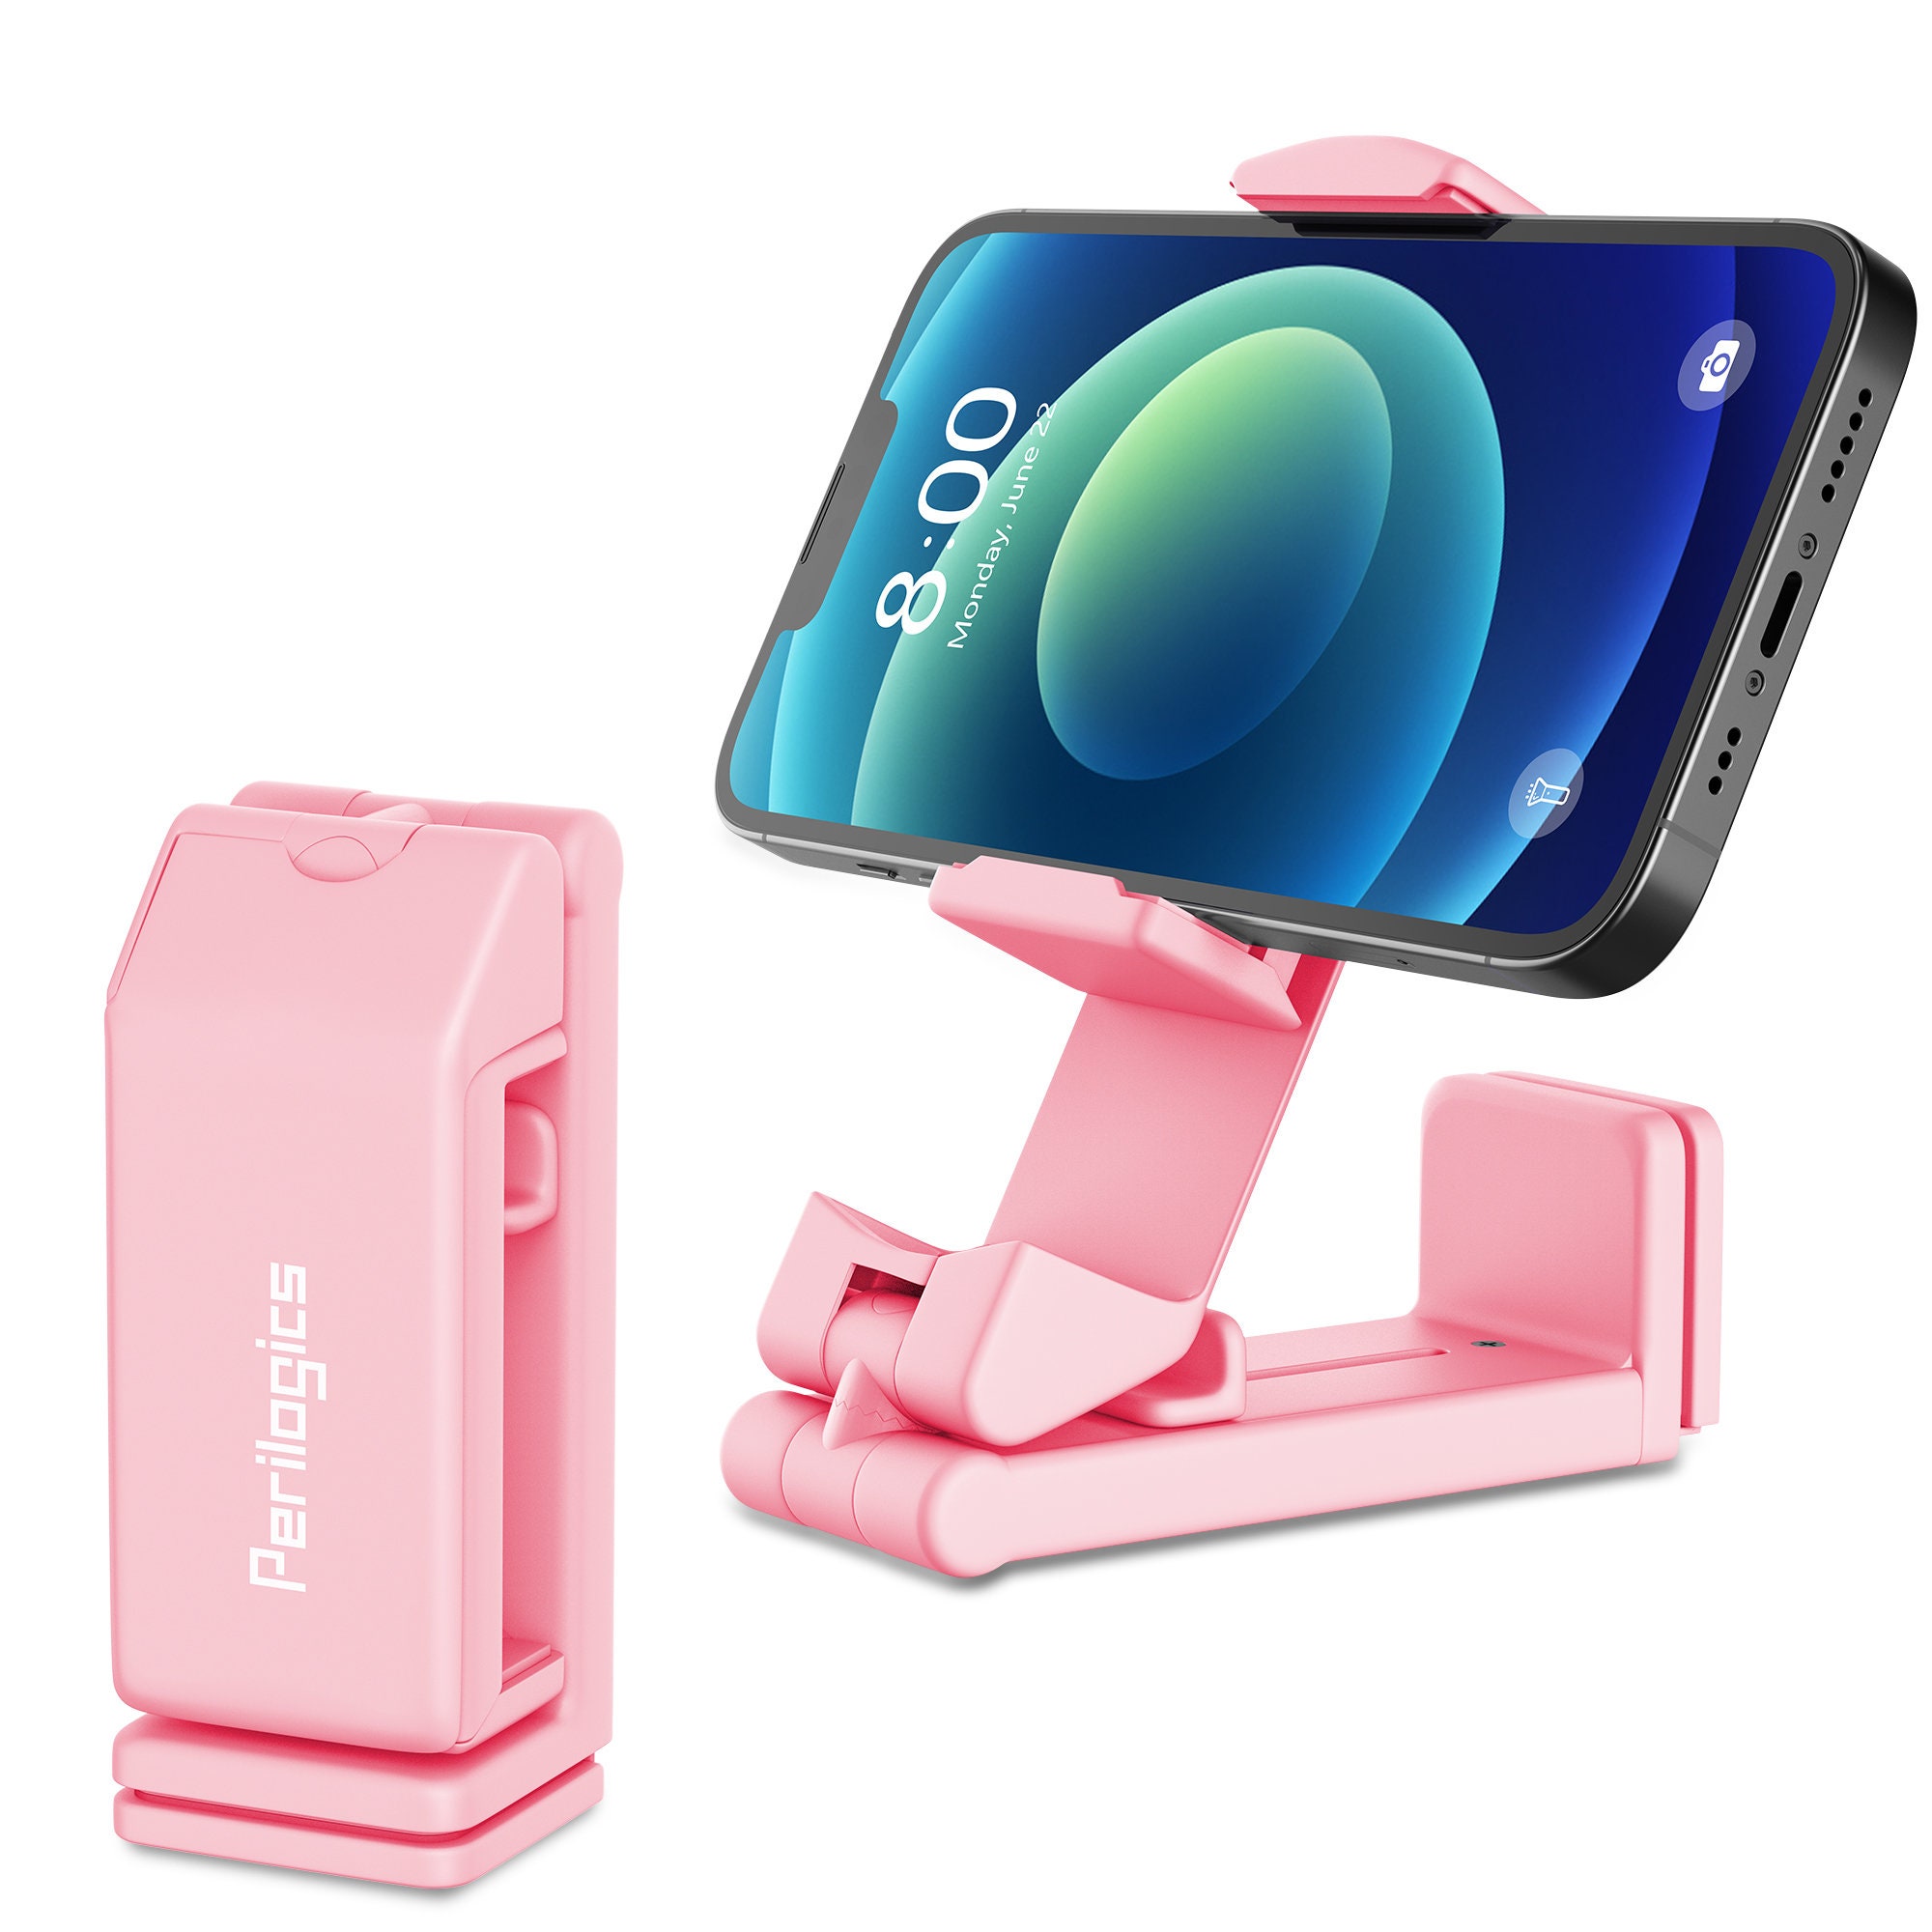 Travel Essential Airplane Phone Mount for Bring Your Own Device